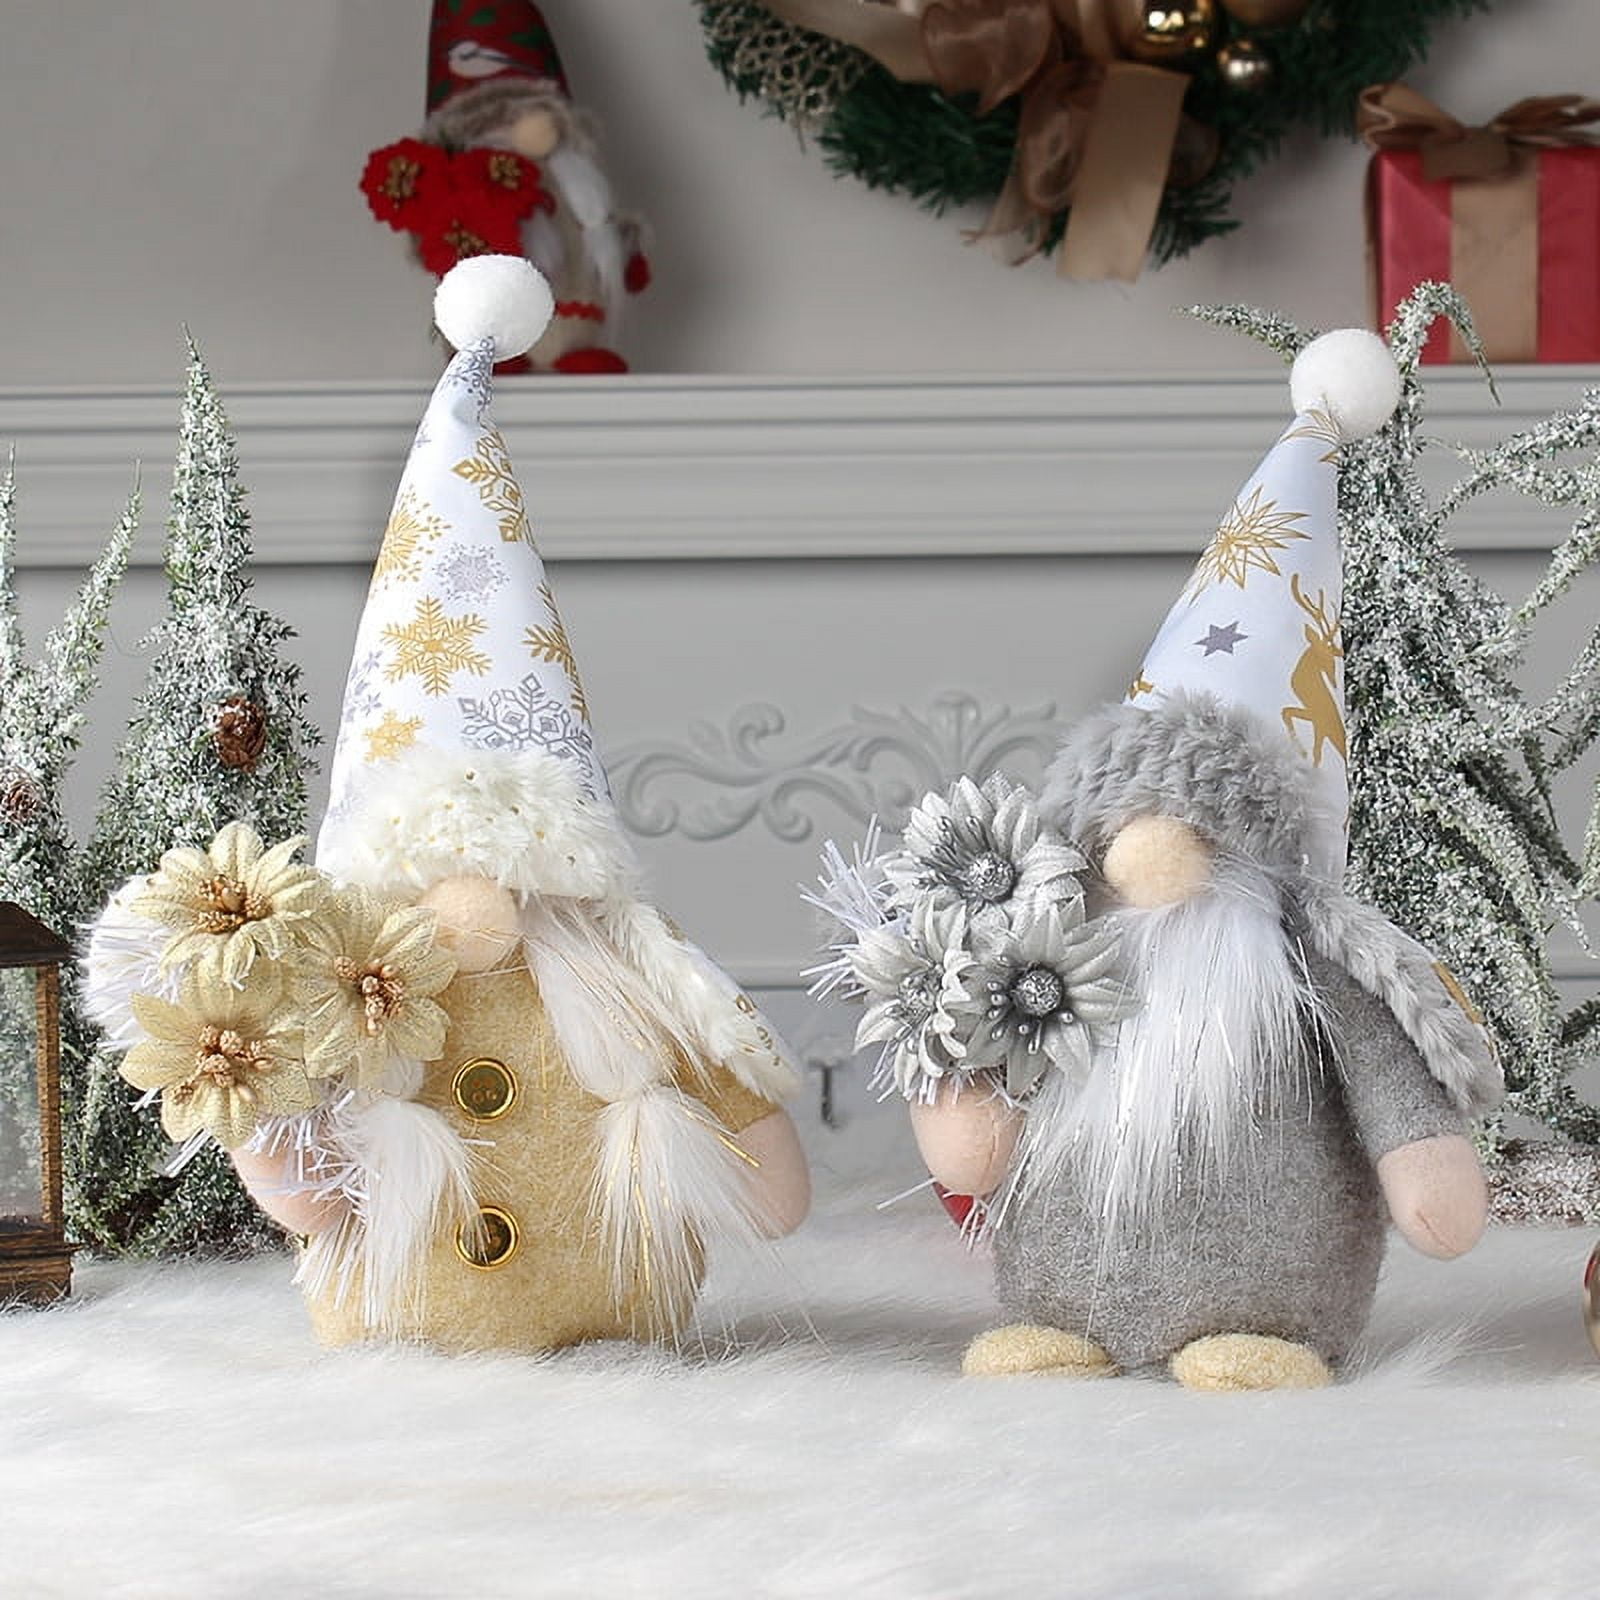 Gnome Christmas Decorations 2 PCS, Red Silver Sequin Hat Antlers Gnomes  Plush Xmas Decorations Indoor Ornaments Christmas Stocking Stuffers  Reindeer Elf Doll For New Year Holiday Valentine Gifts